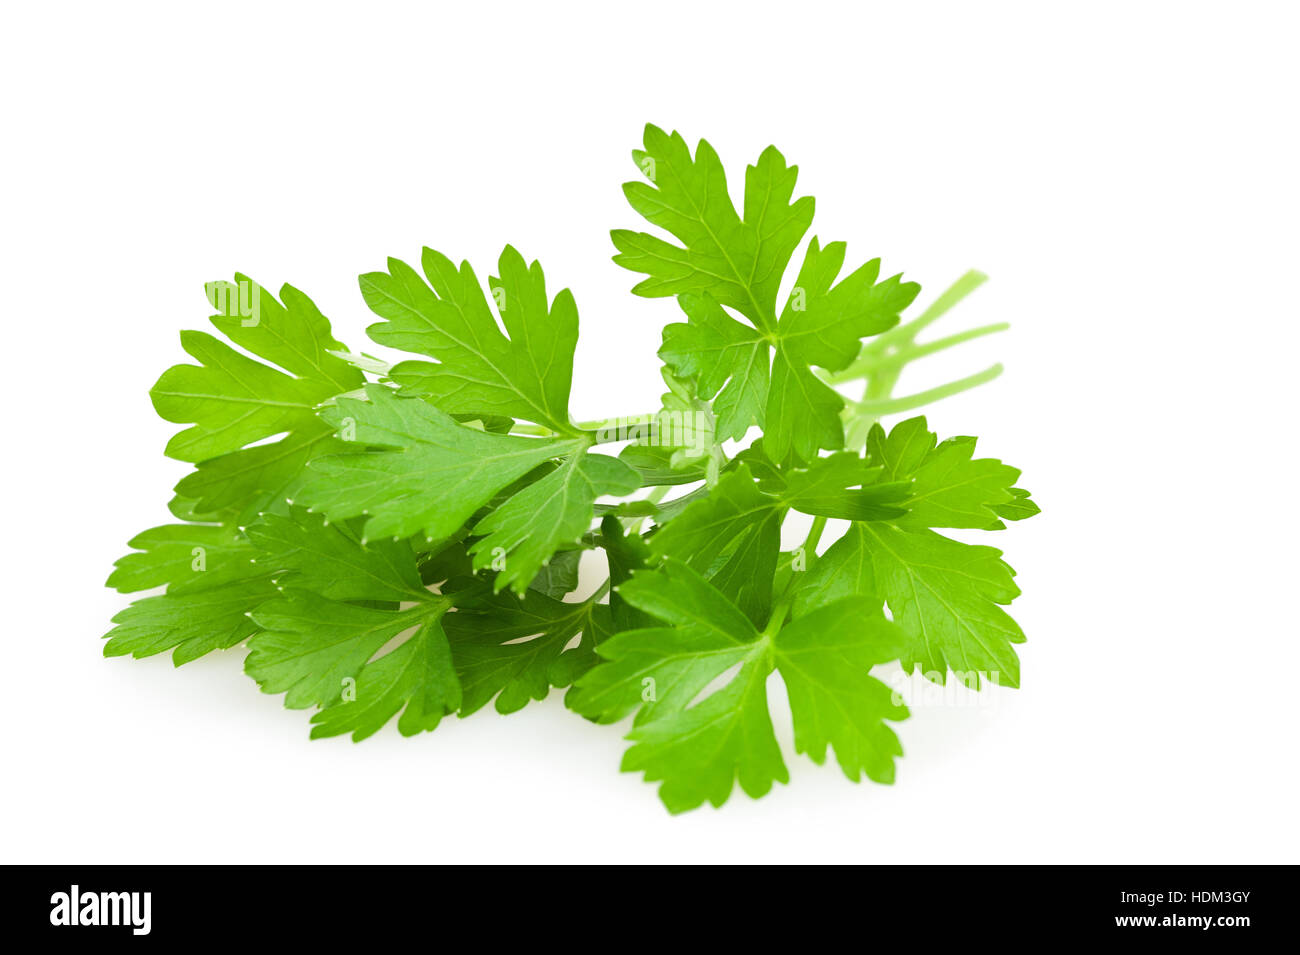 green parsley leaves   isolated on white background Stock Photo